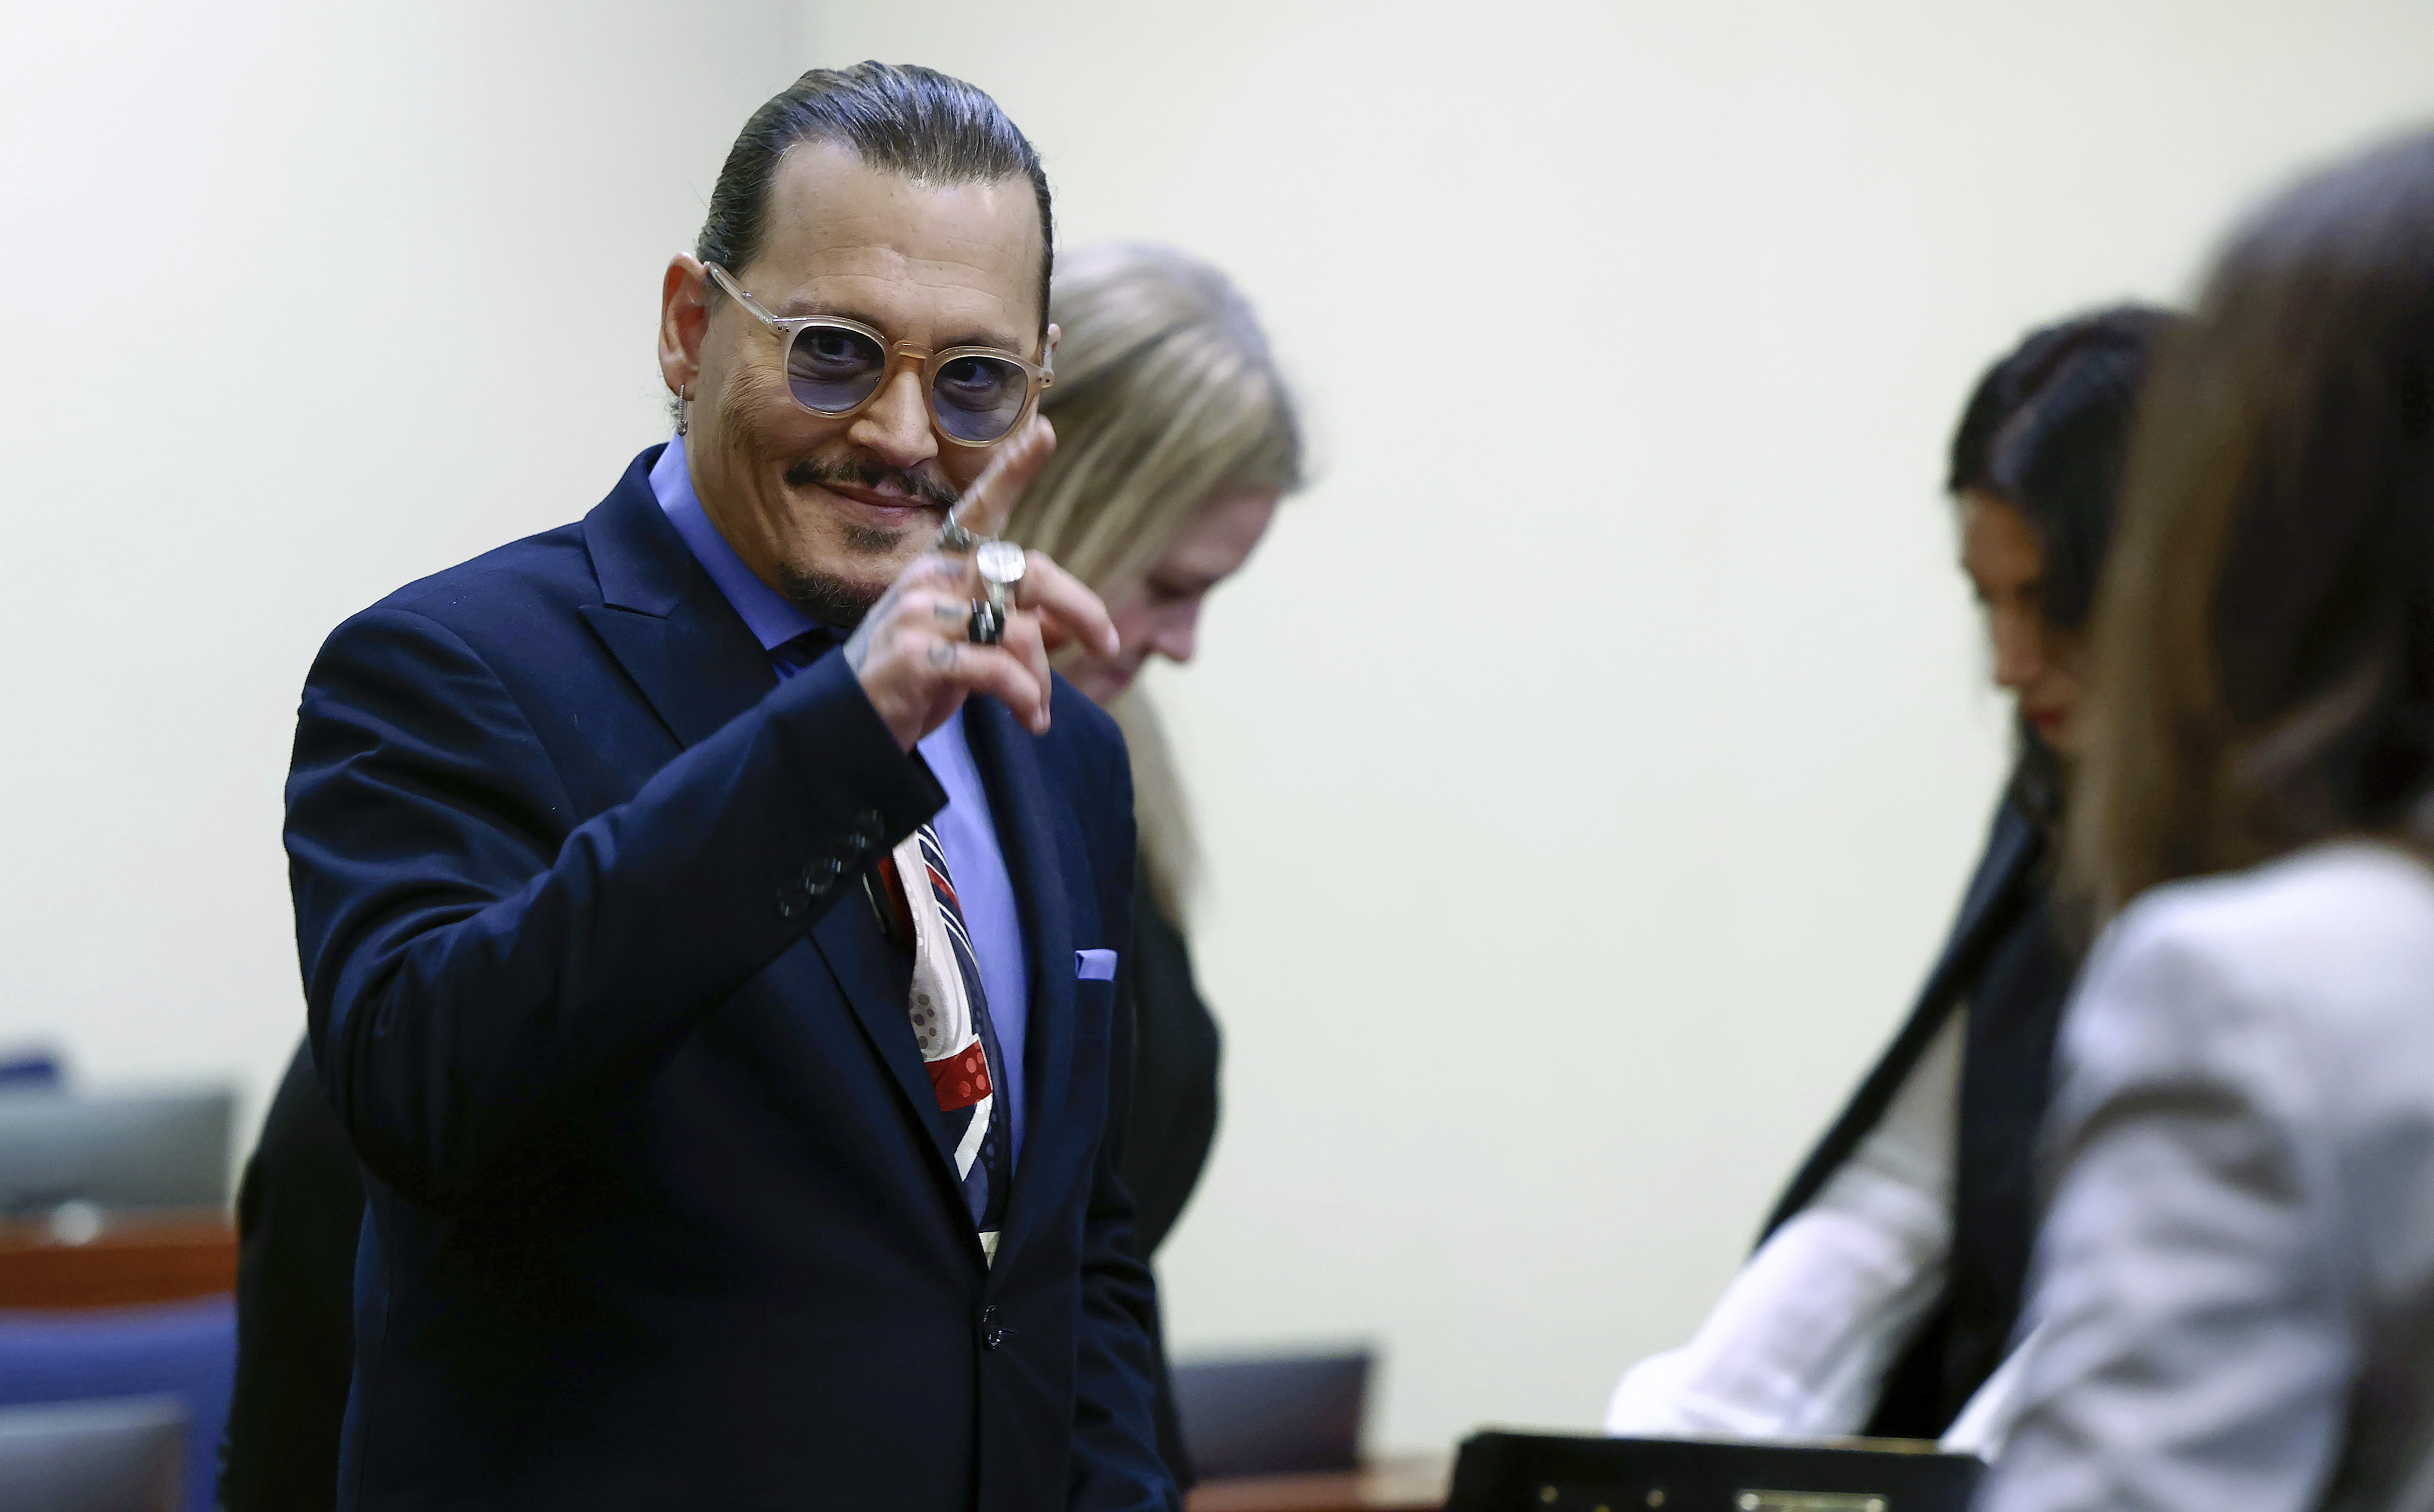 US actor Johnny Depp arrives before the start of the day during the 50 million US dollar Depp vs Heard defamation trial at the Fairfax County Circuit Court in Fairfax, Virginia, USA, 05 May 2022 